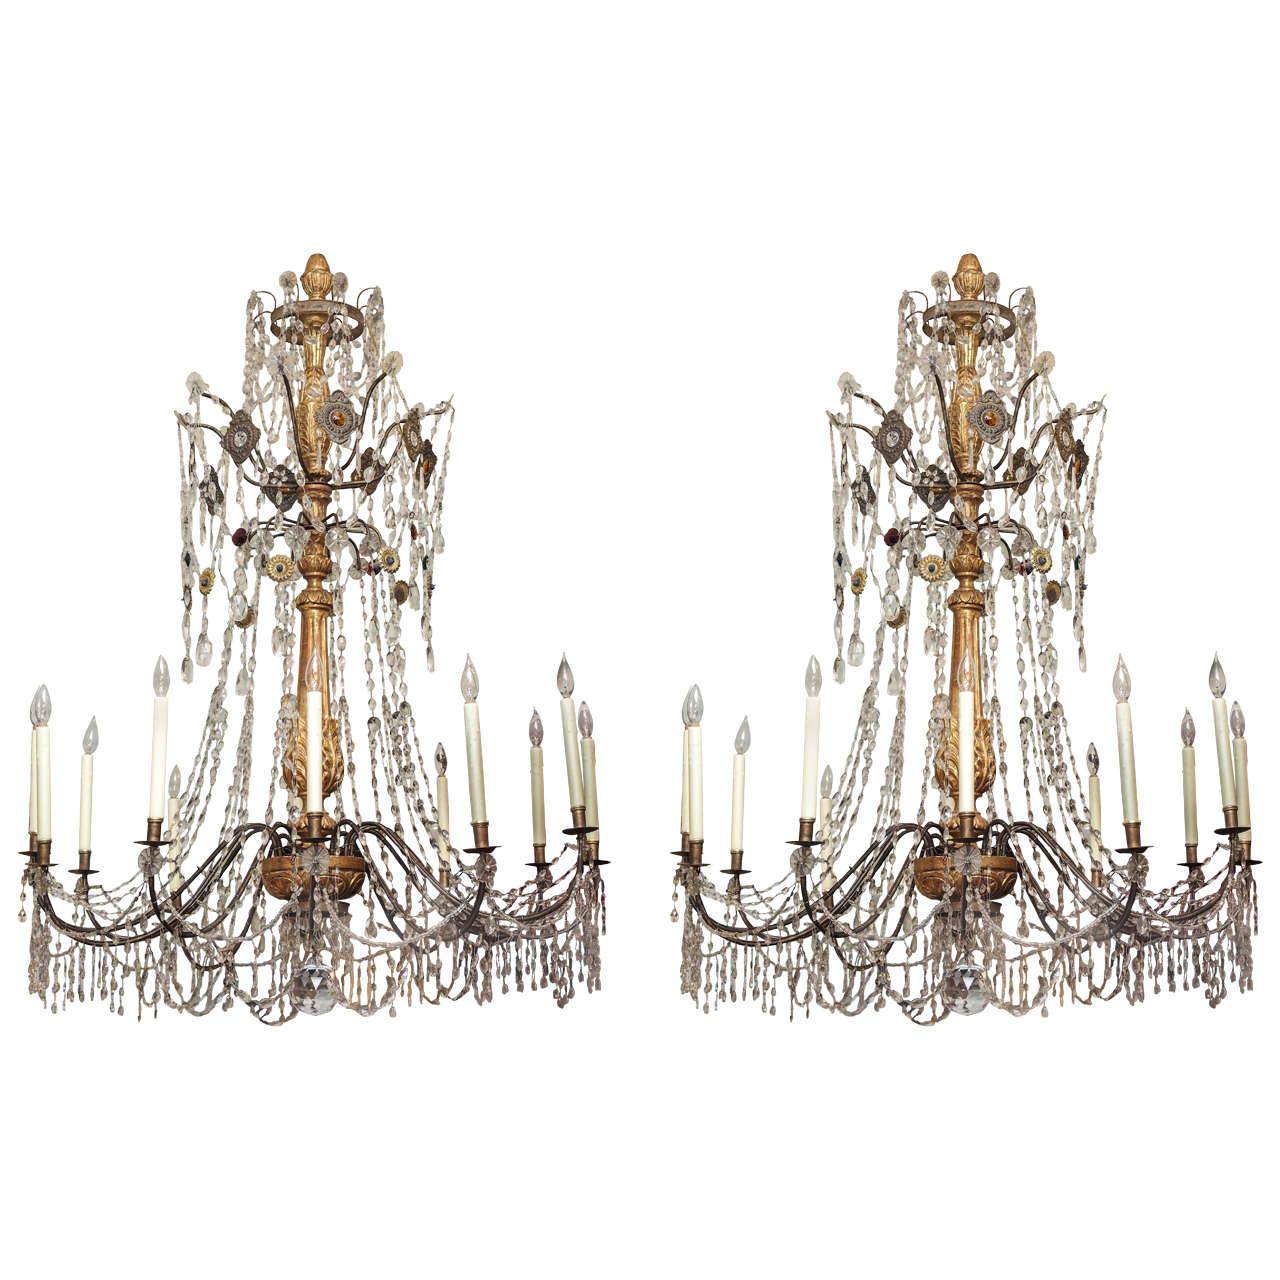 Pair of 19th Century Genovese Giltwood, Iron and Crystal Twelve-Light Chandelier